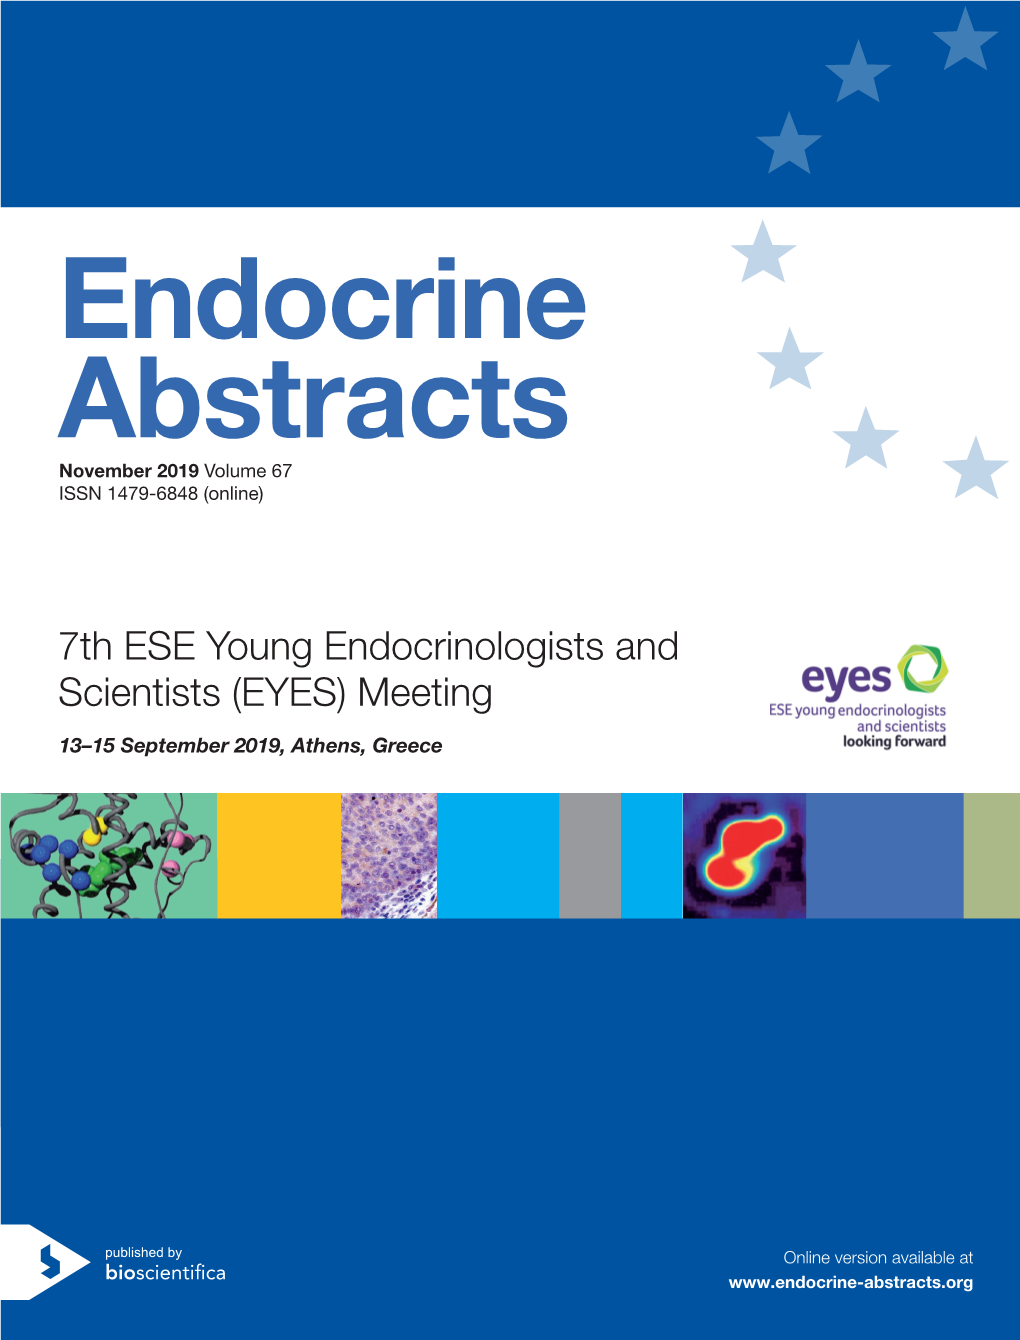 Endocrine Abstracts November 2019 Volume 67 ISSN 1479-6848 (Online)